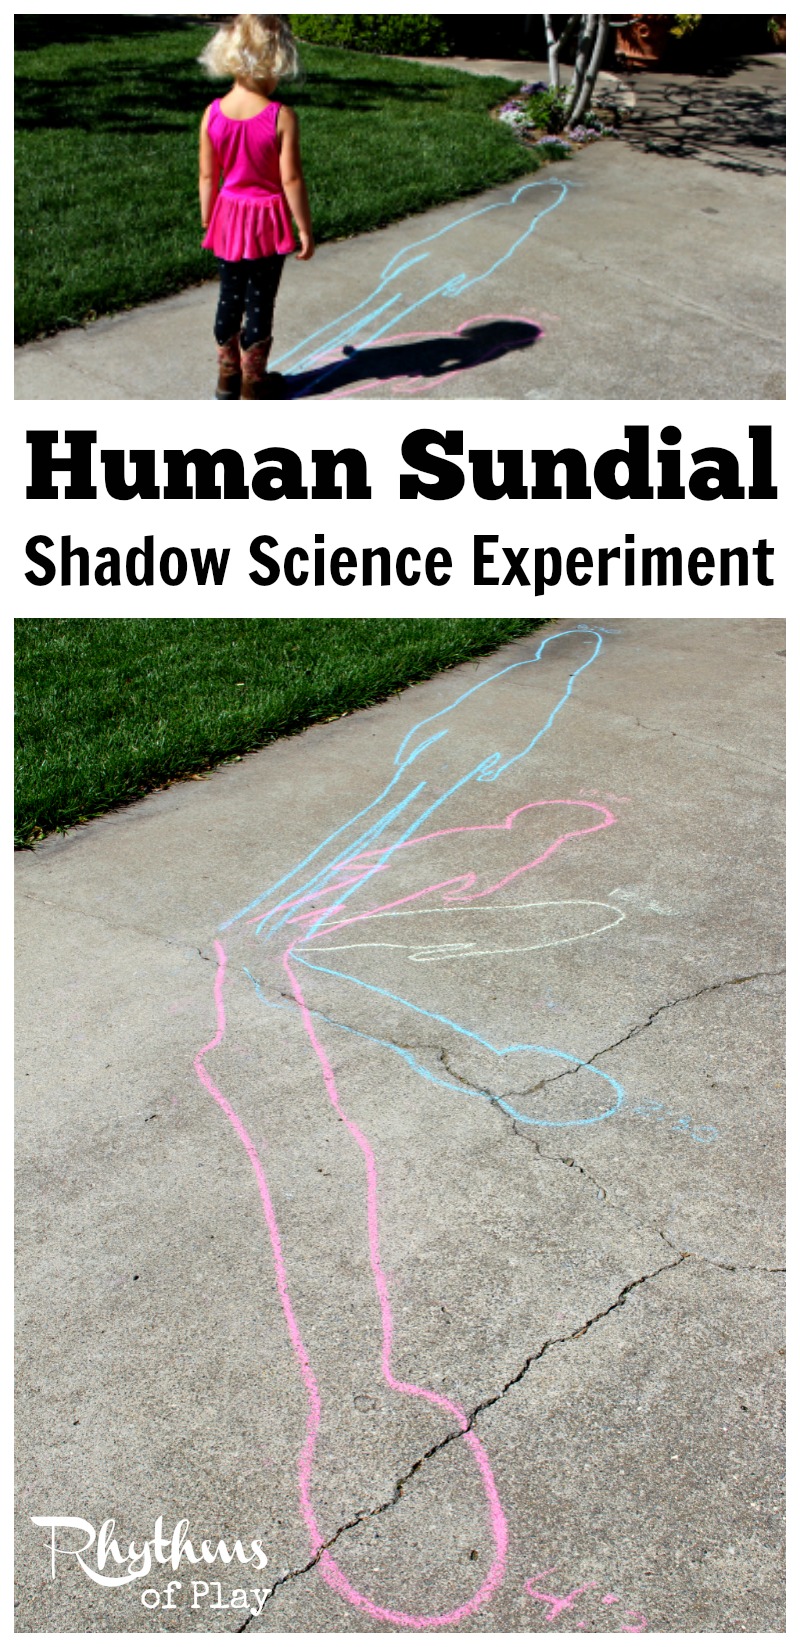 Human-sundial-shadow-science-experiment-Pin1